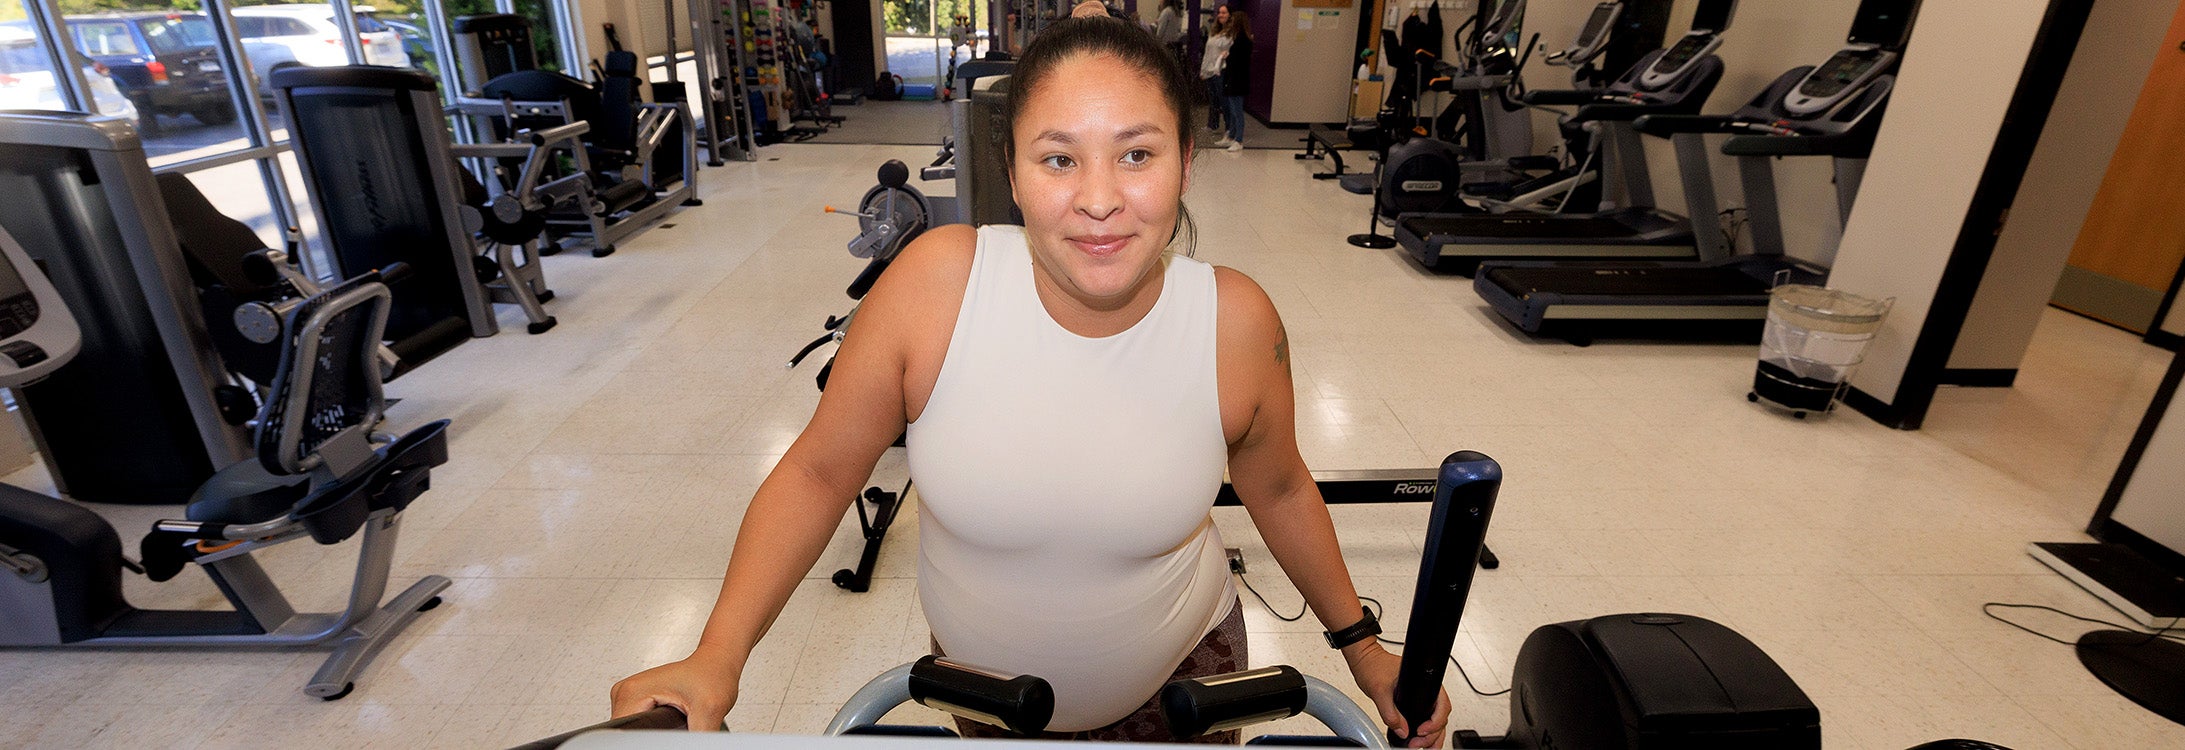 Johanne Hyde exercises at the ECU Fitness, Instruction, Testing and Training Building, which serves as an exercise training facility for research studies. (ECU News Services photo)